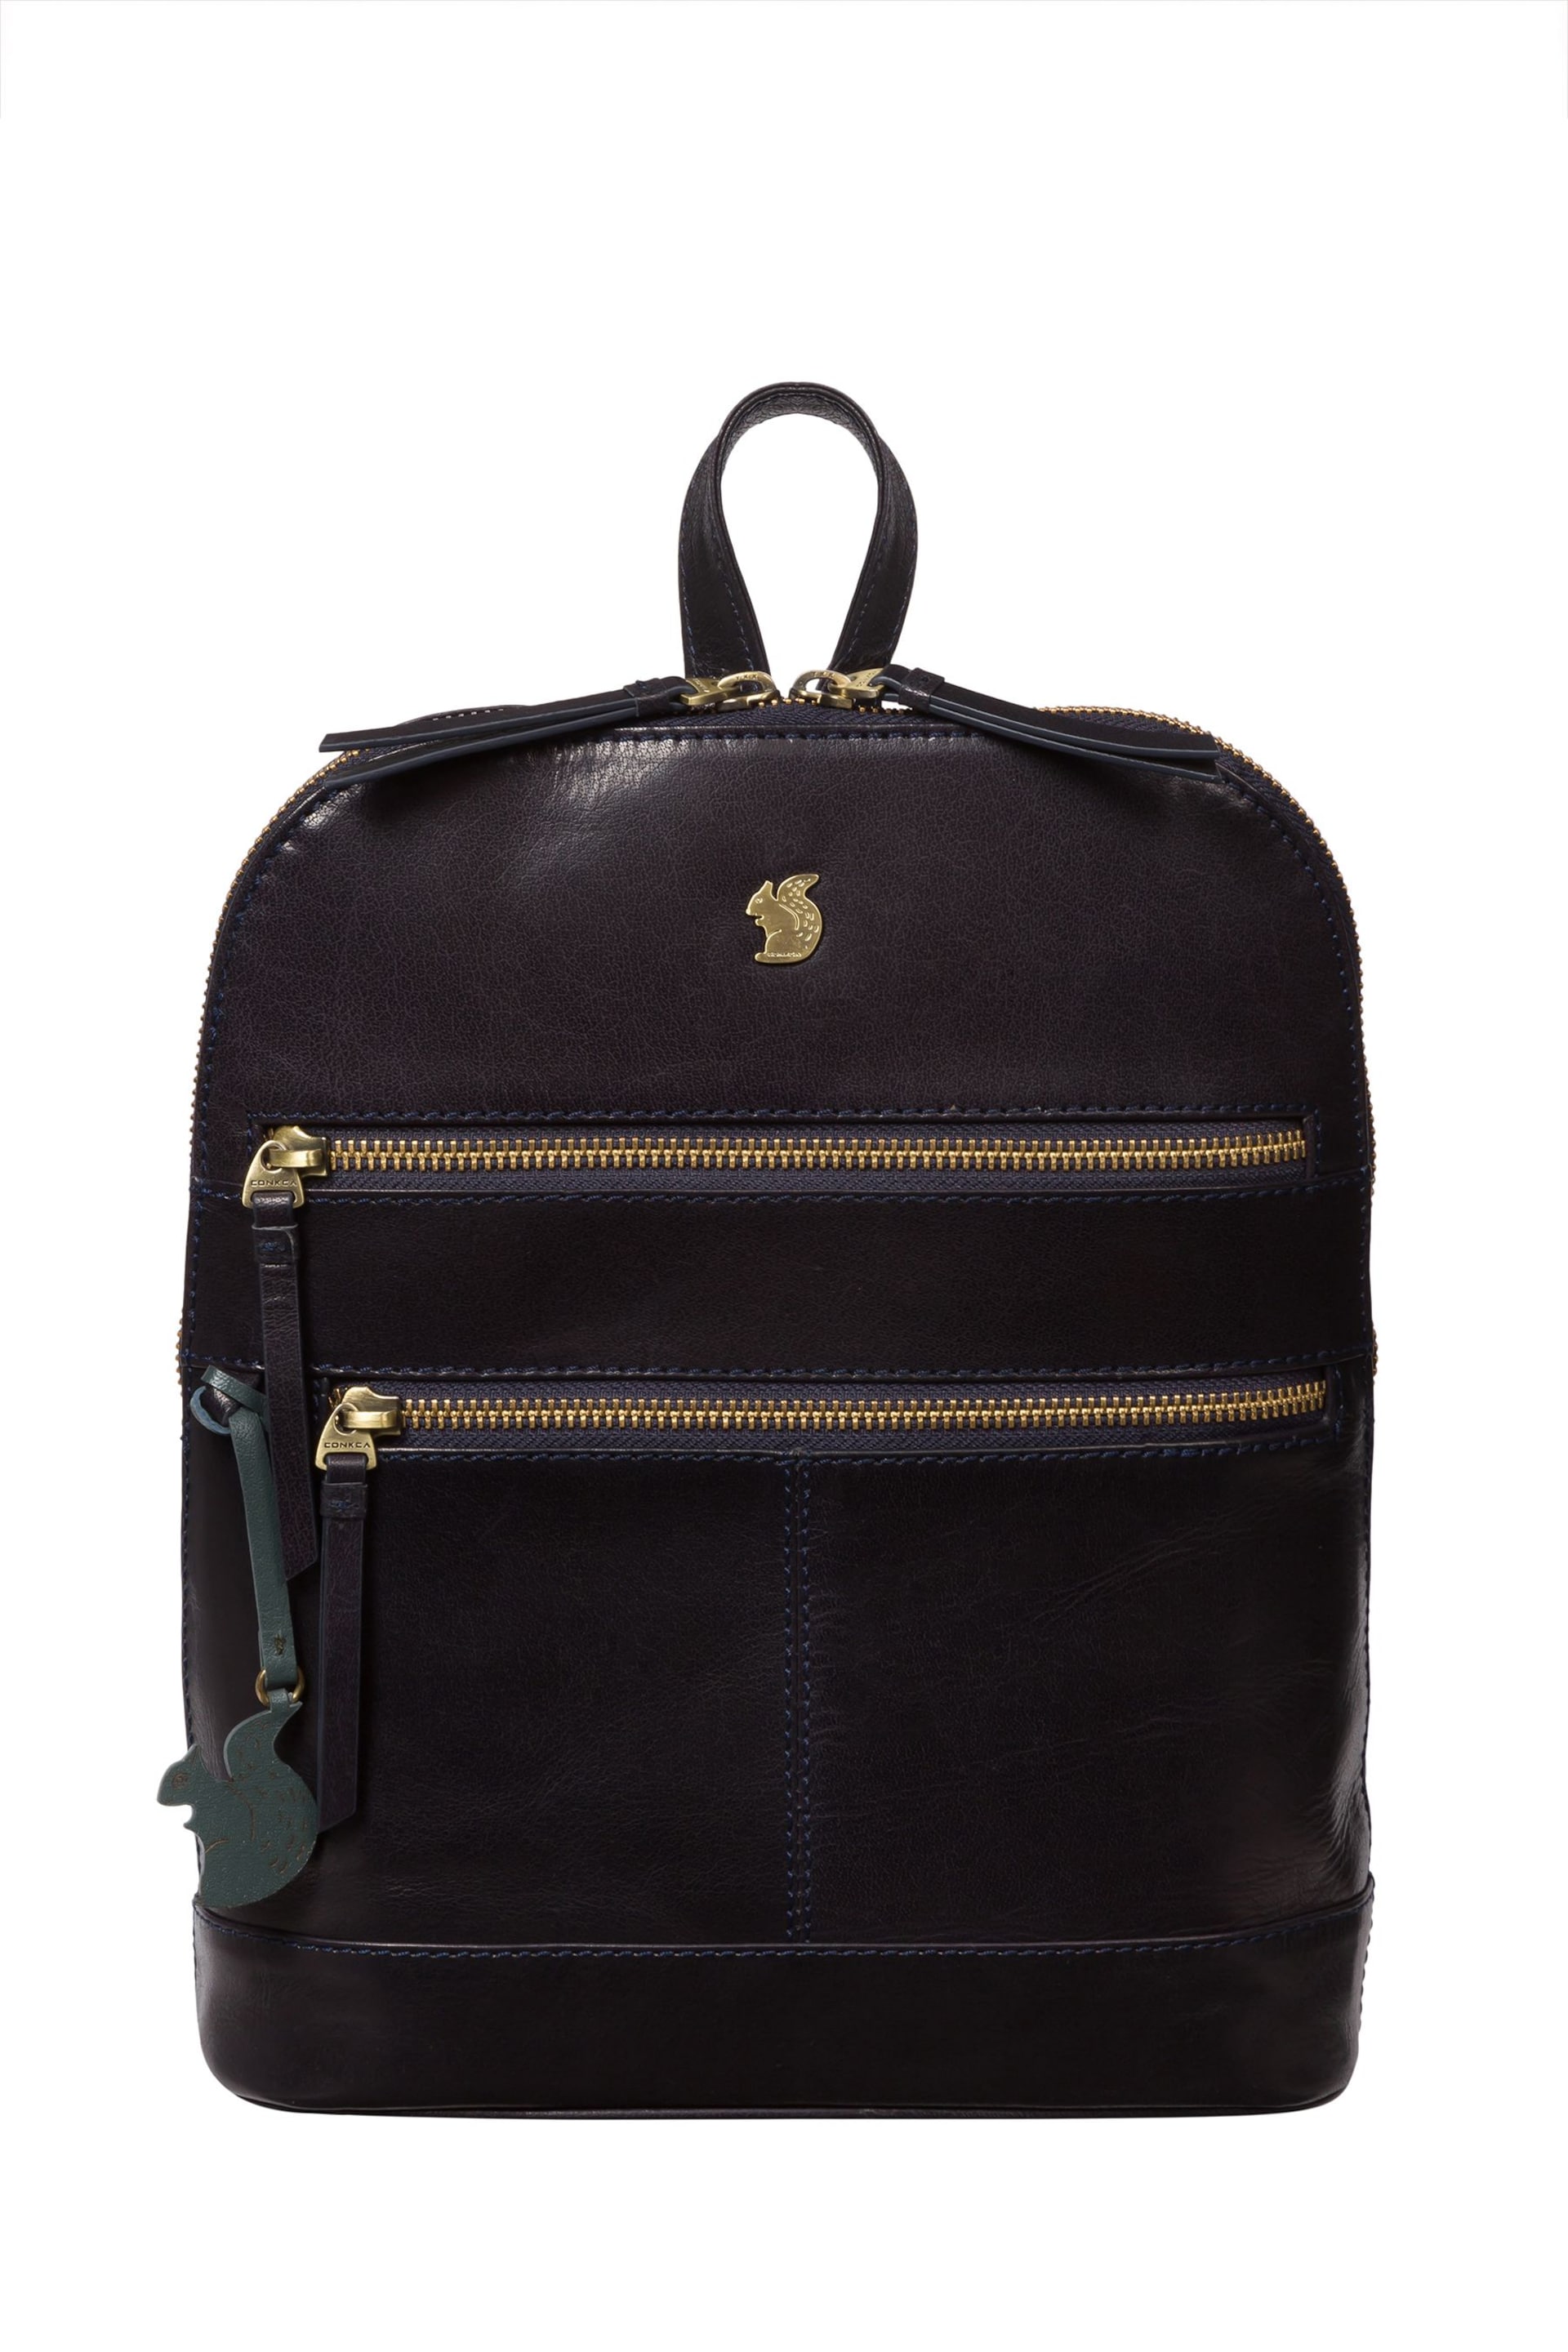 Conkca Francisca Leather Backpack - Image 1 of 6